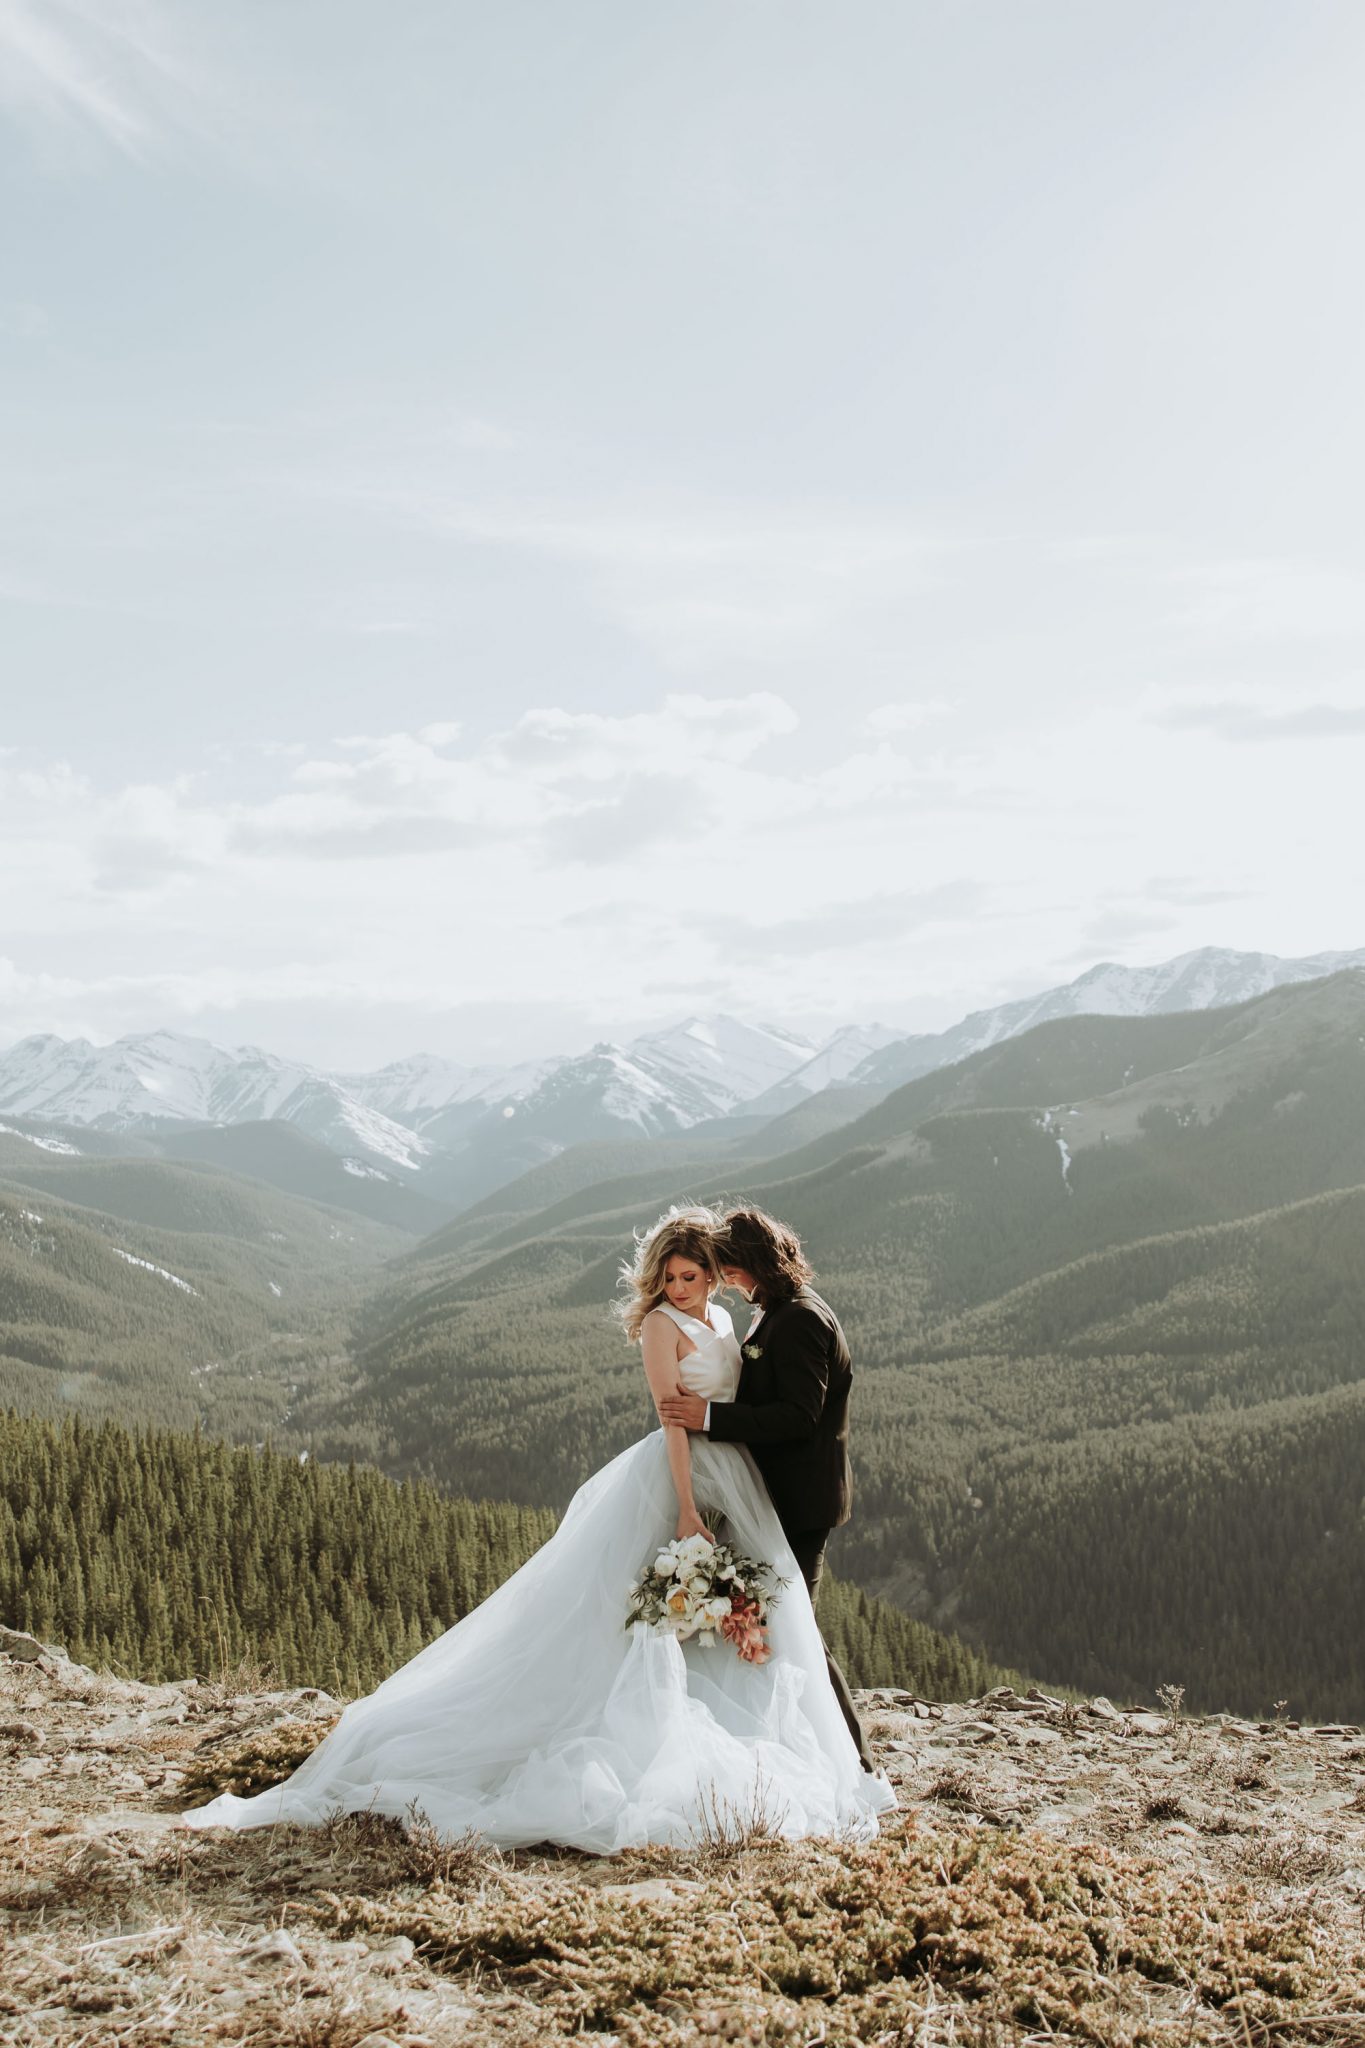 Mountainous Adventure Session with modern bride and groom featuring Contemporary Attire & Alberta Views Featured on Bronte Bridë